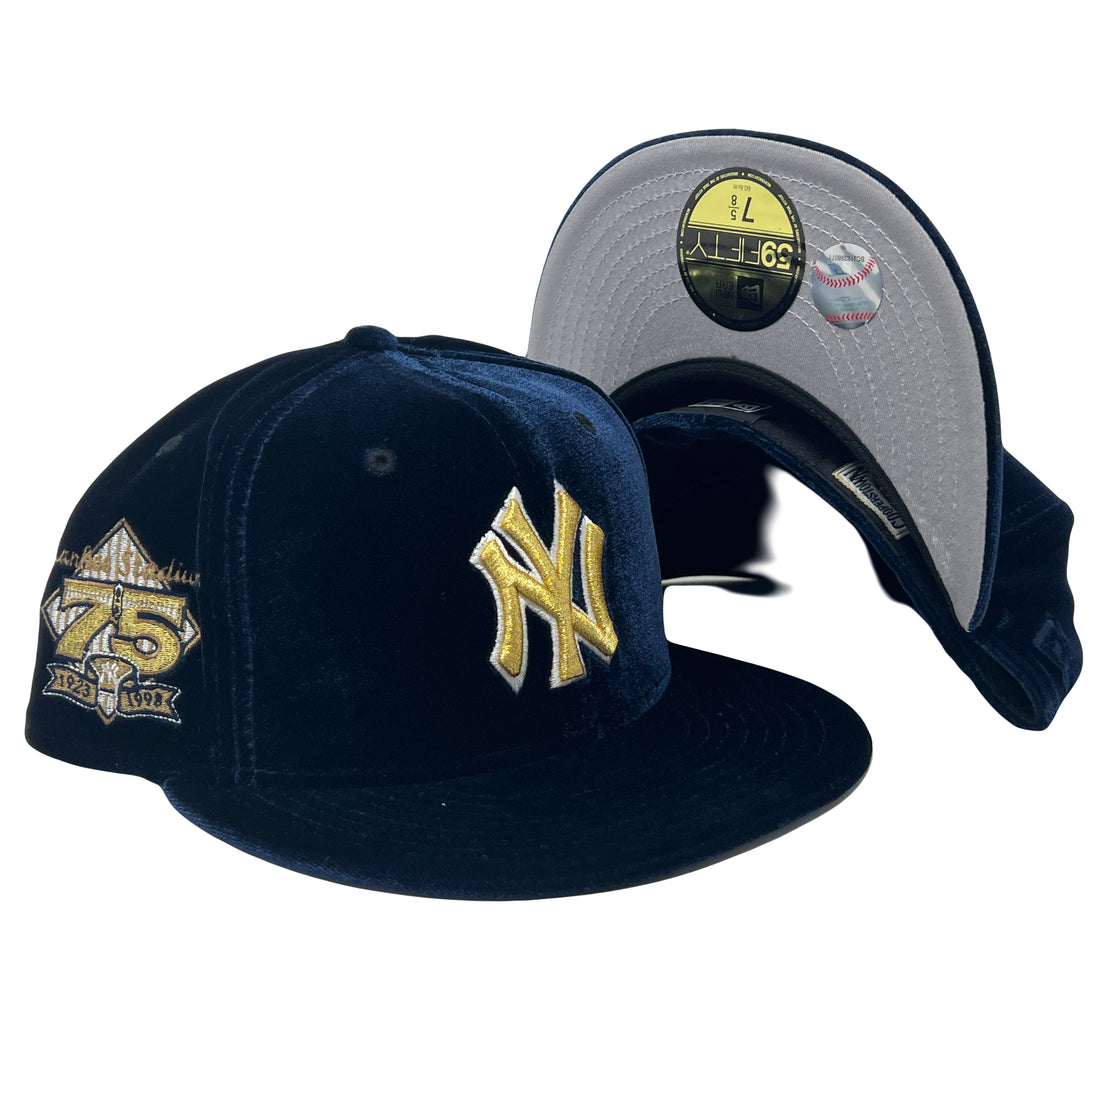 New York Yankees 75th Anniversary Velvet Collection Navy Blue New Era Fitted Hat